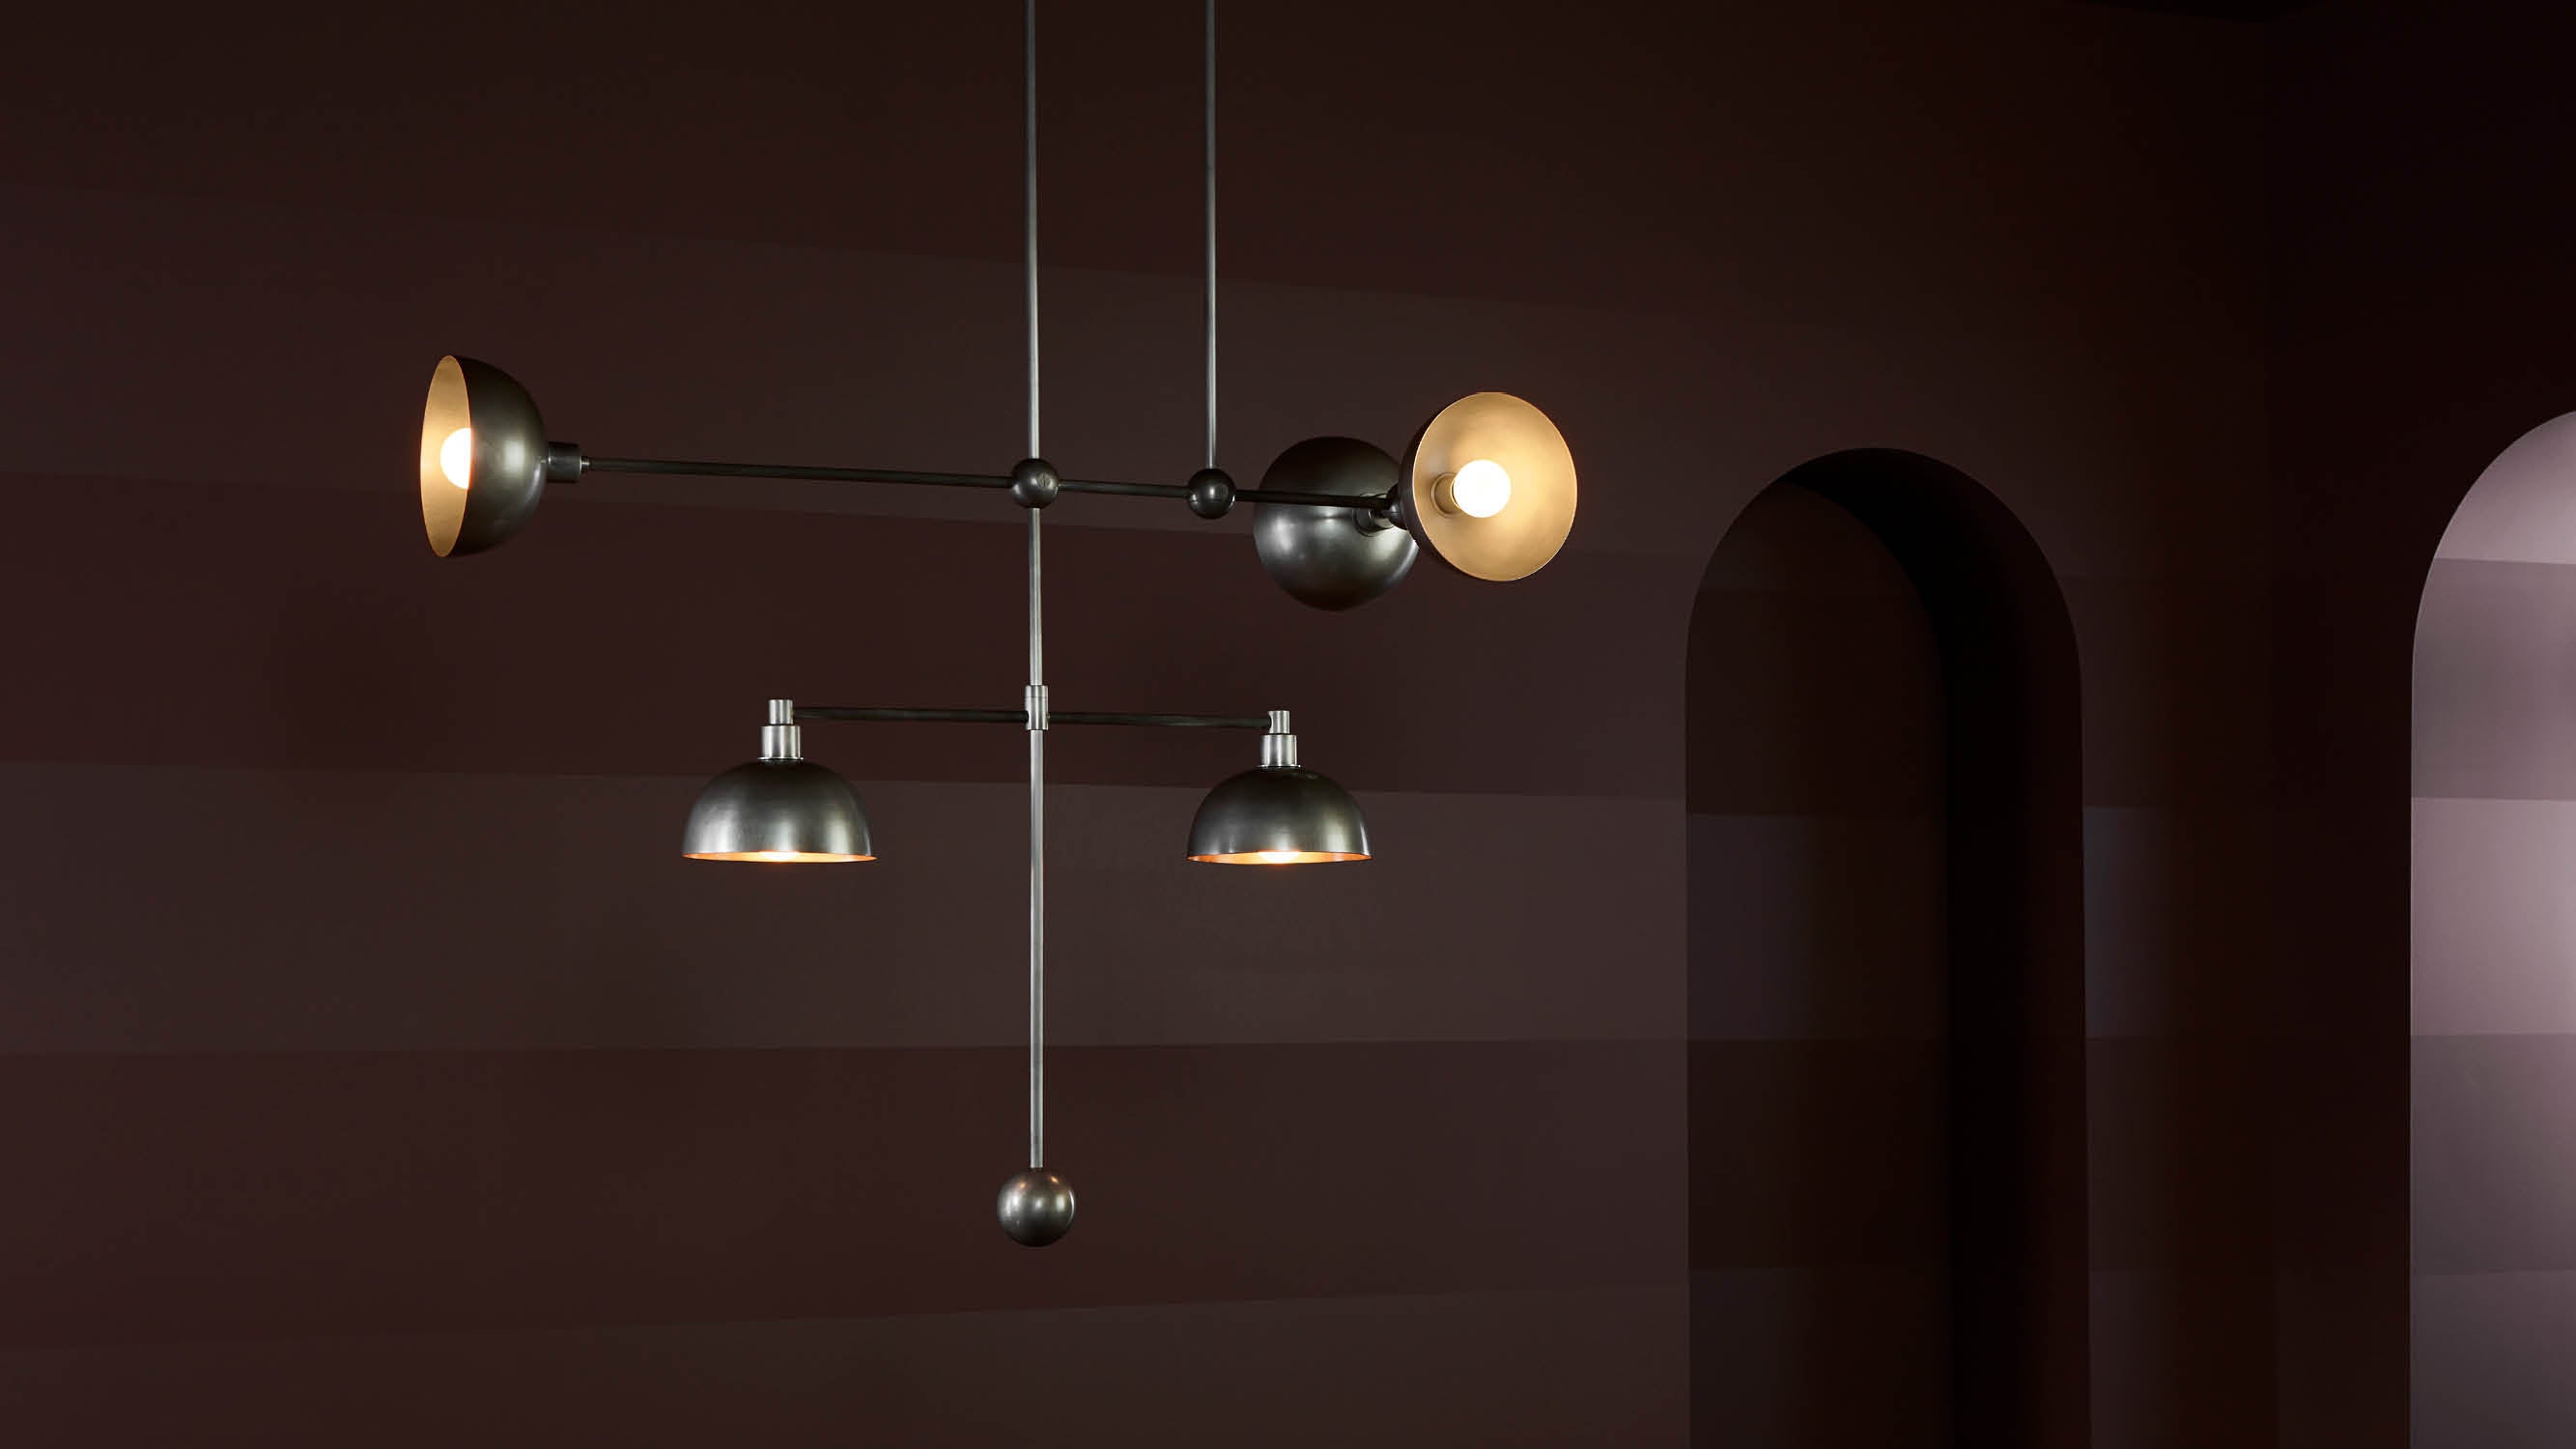 An illuminated TRAPEZE : 5 MOBILE ceiling pendant in Tarnished Silver finish. 